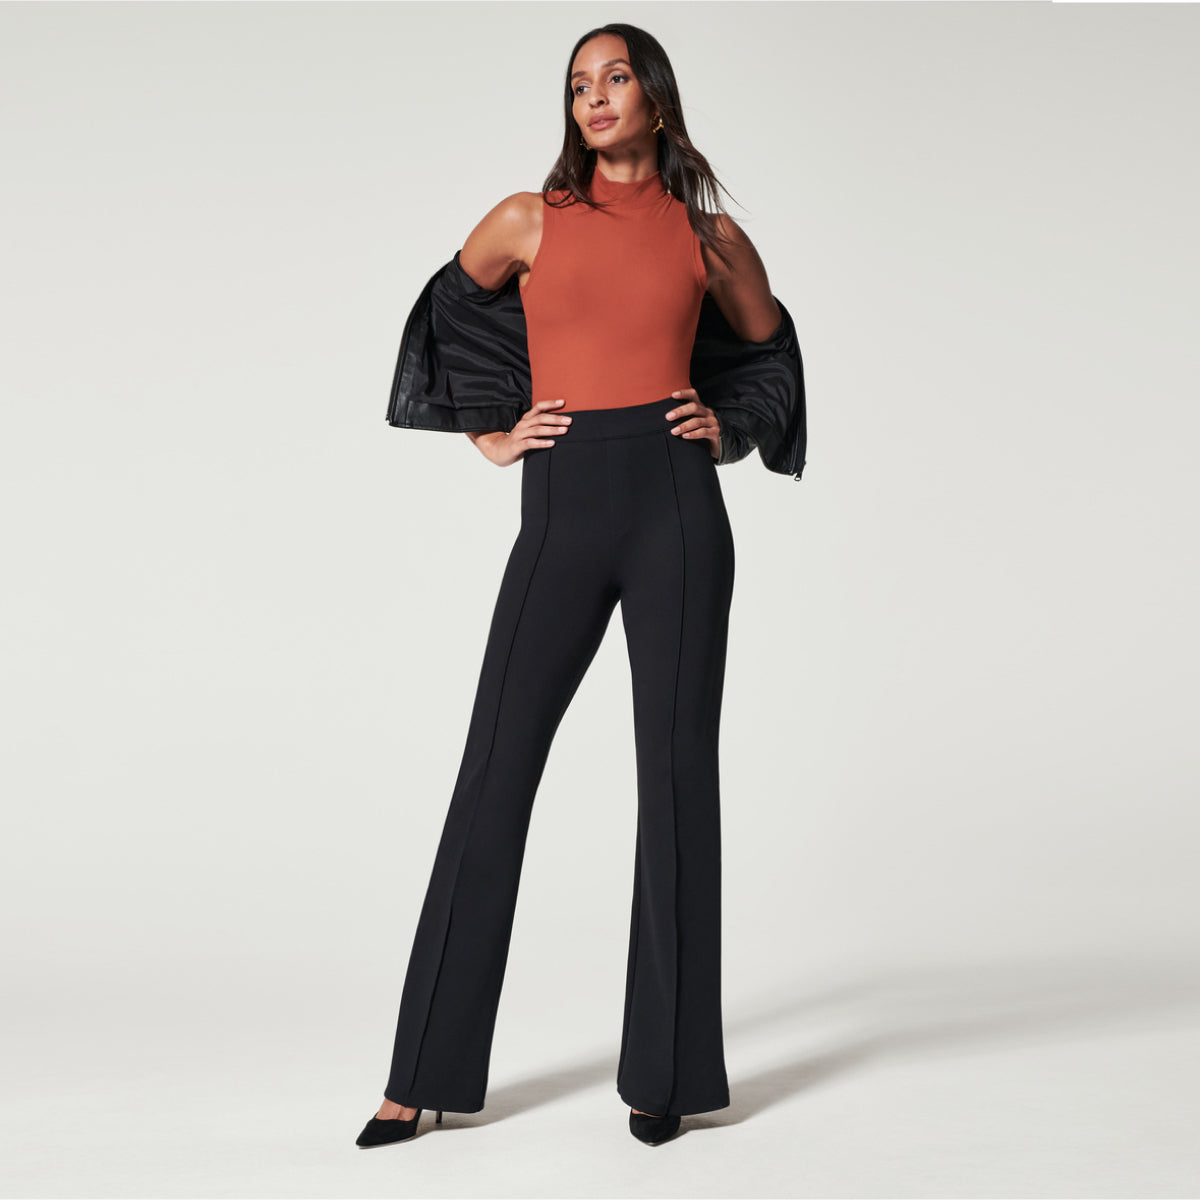 Spanx trousers - Spanx launches The Perfect Black Pant trousers that work  like shapewear